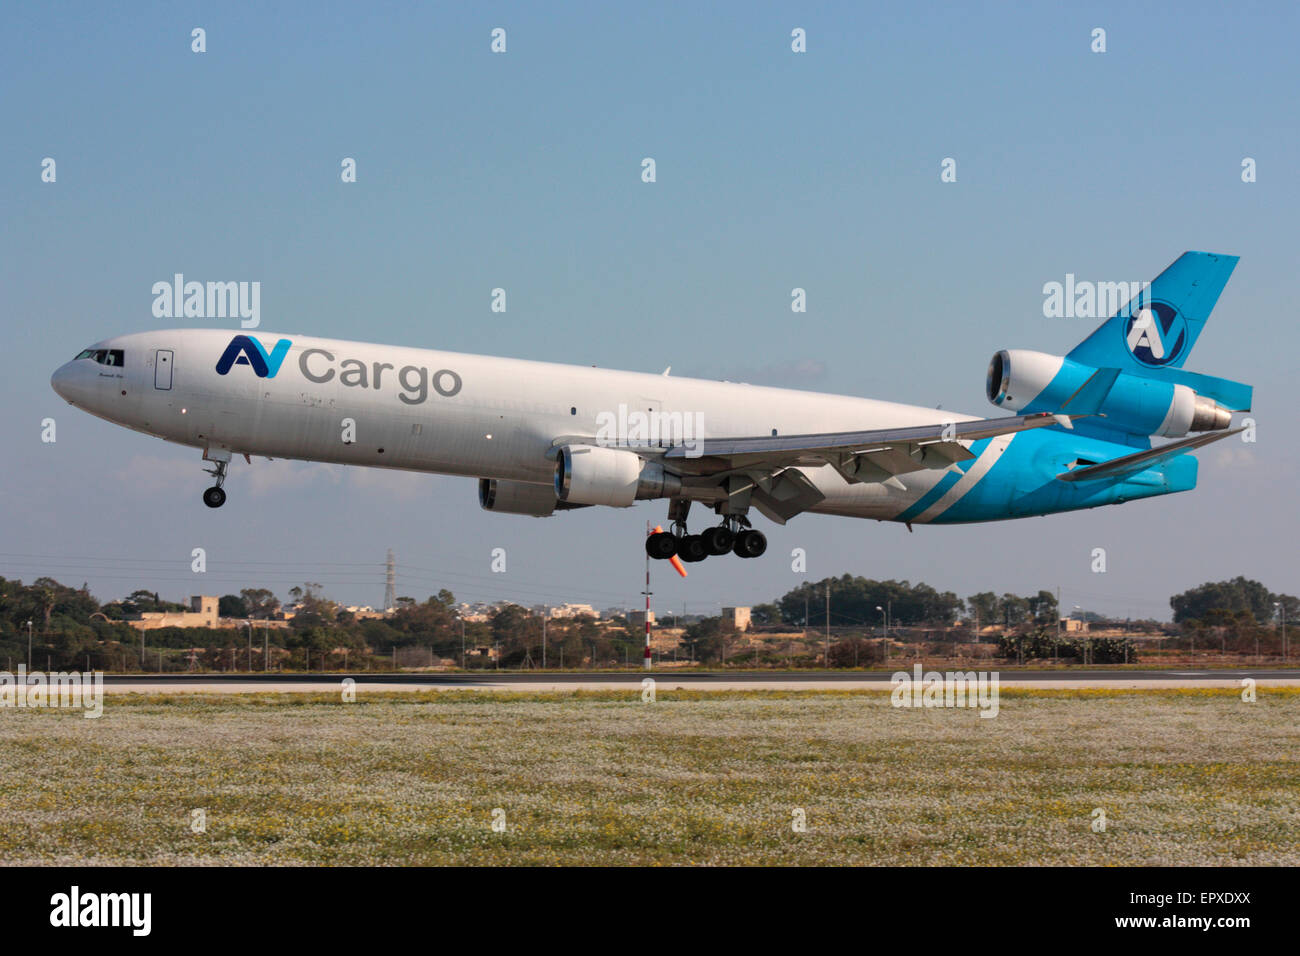 McDonnell Douglas MD-11F transport plane belonging to AV Cargo on arrival in Malta. Worldwide air freight delivery. Stock Photo